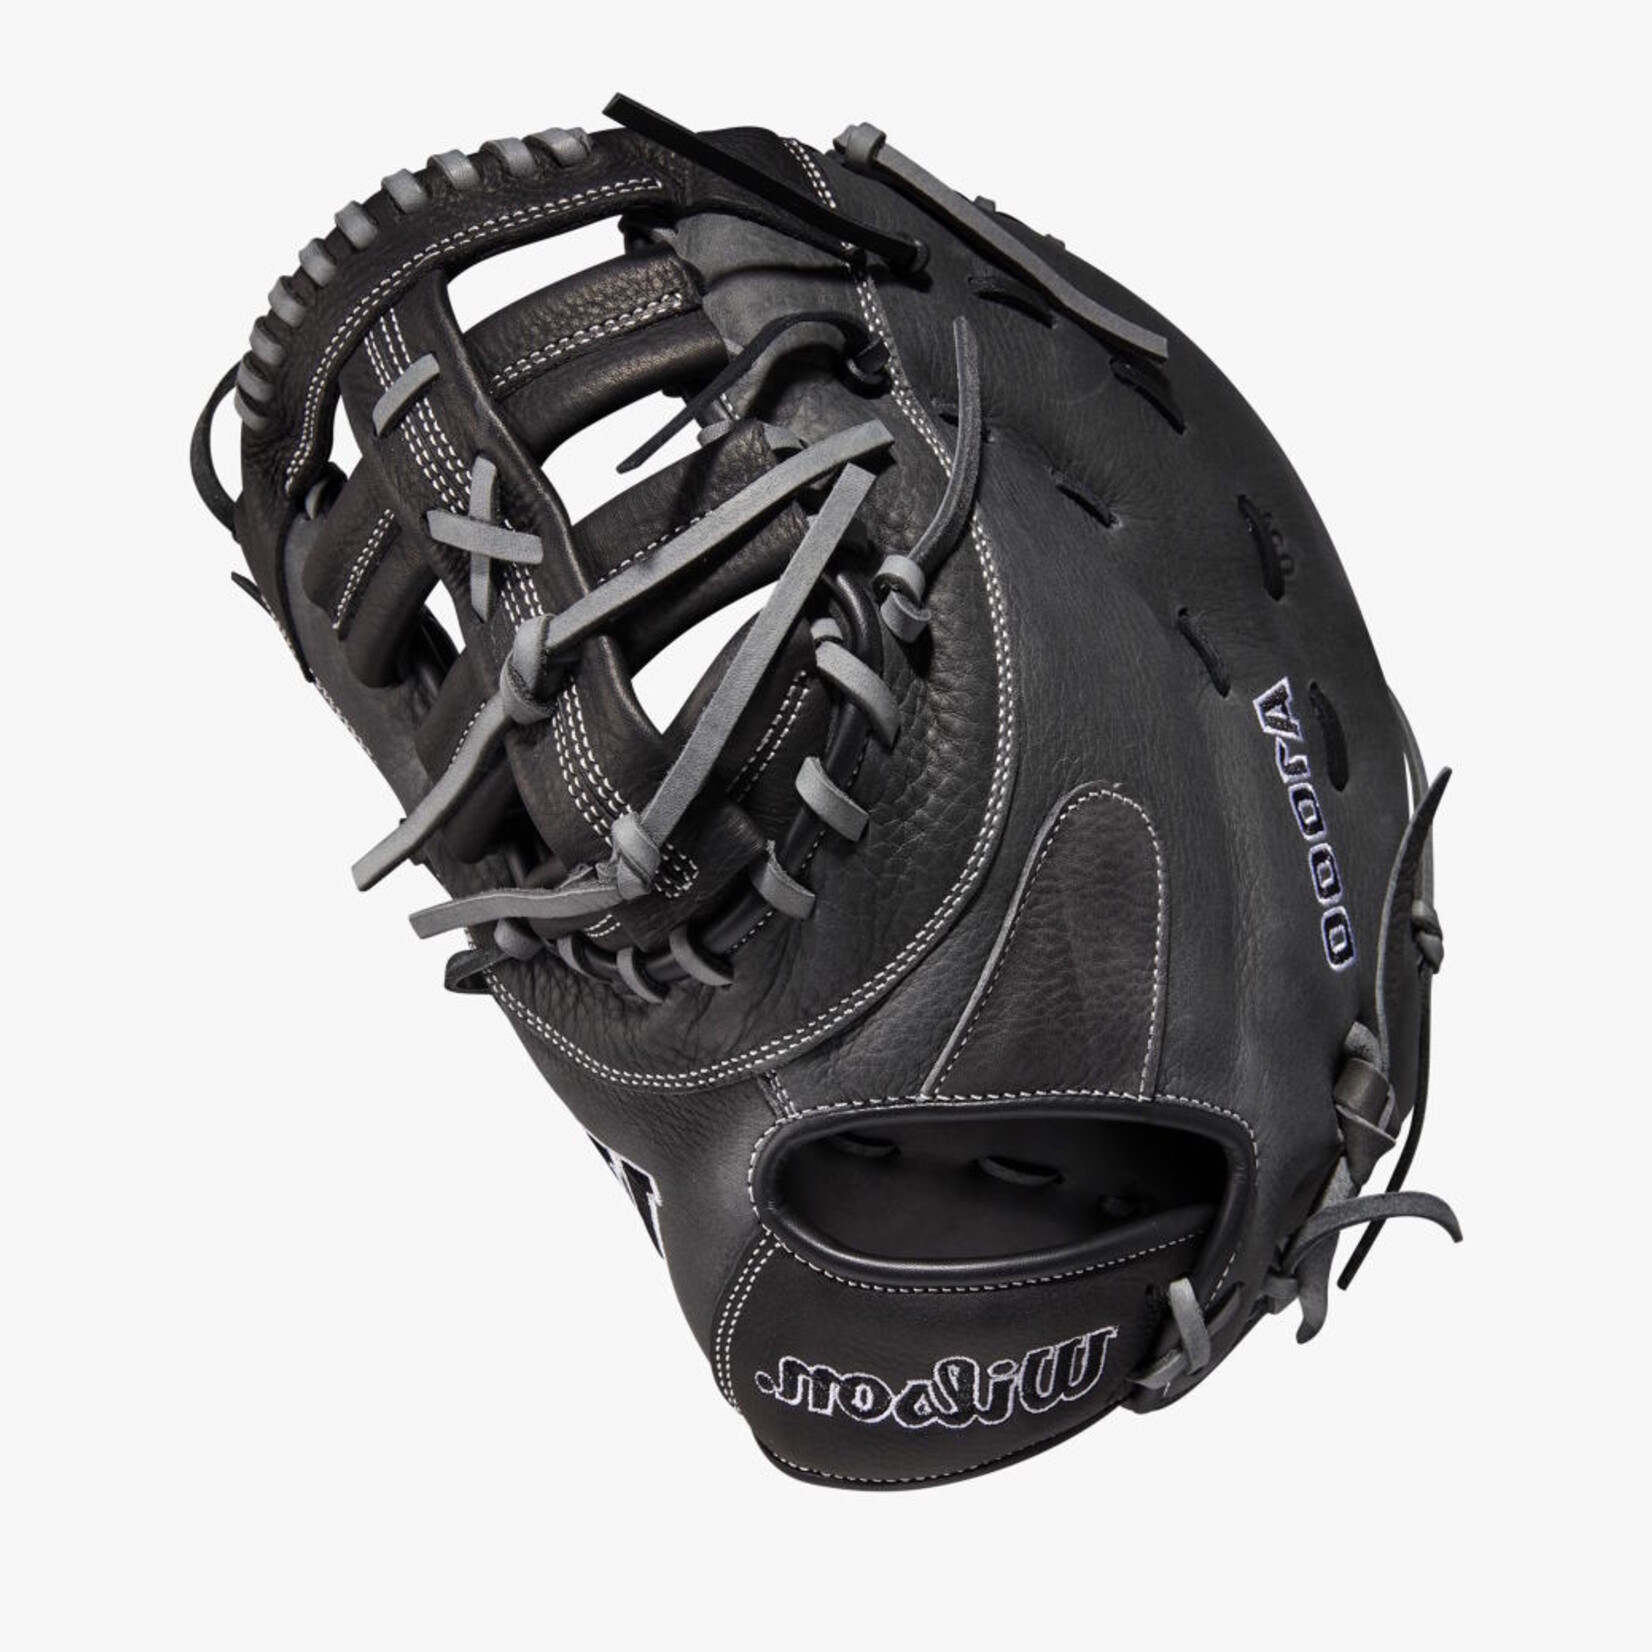 Wilson Wilson Baseball Glove, A1000 1620, Full Right, 12.5", First Base Pattern, Blk/Gry/Wht